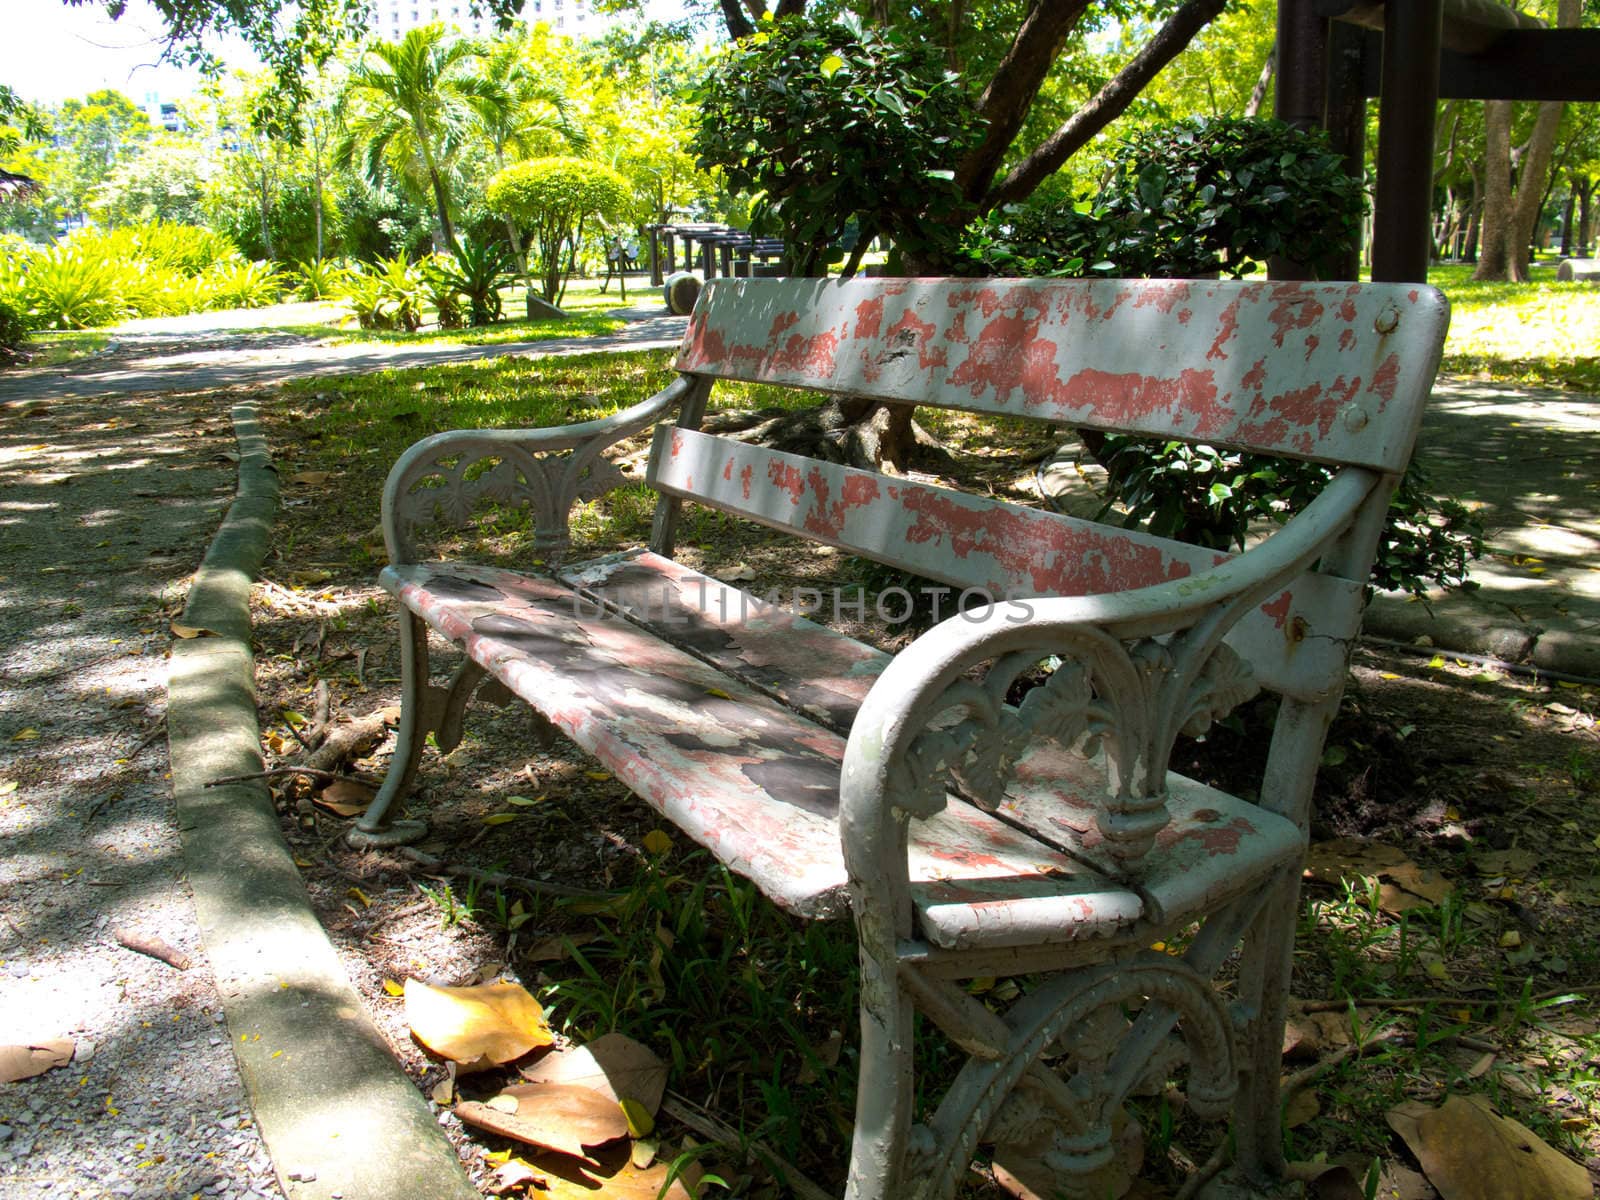 An old bench in a park